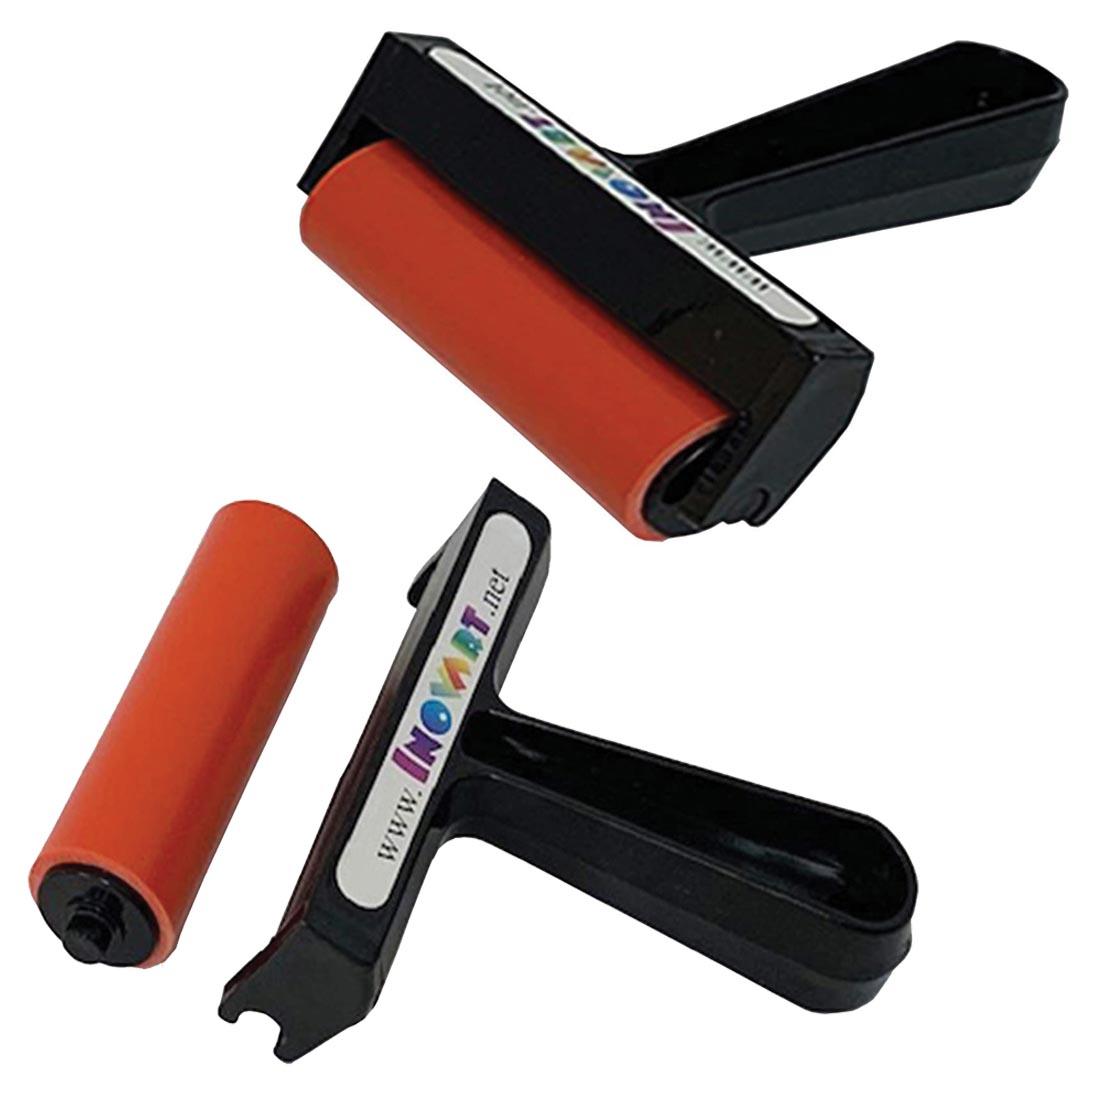 Inovart Hard Rubber Brayer shown both assembled and with roller snapped out of handle